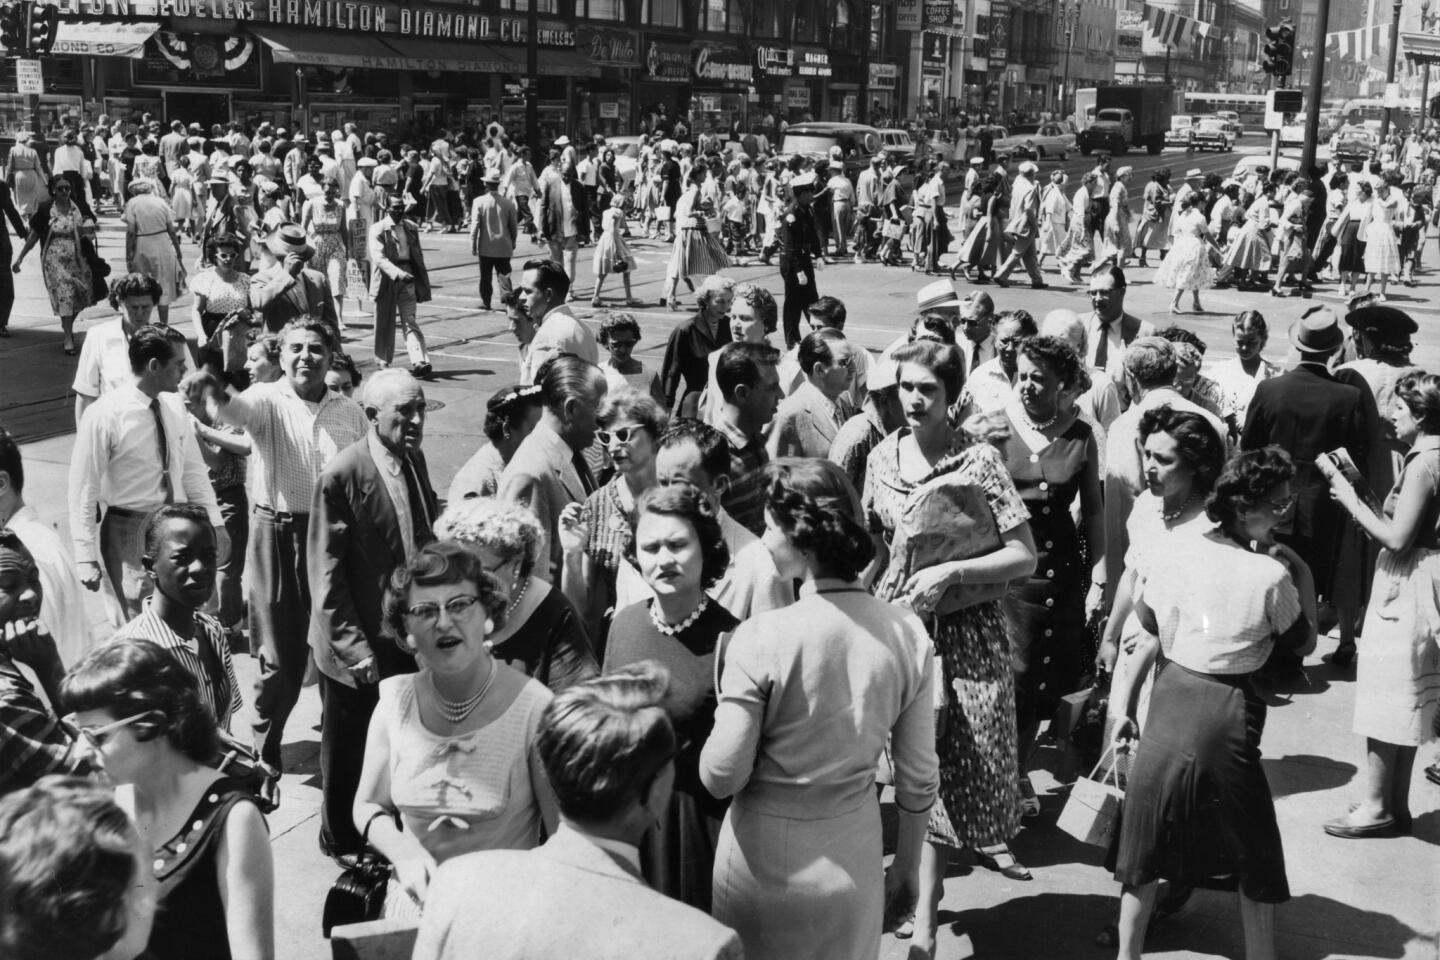 Long before Black Friday, downtown L.A. created shopping frenzy and ...